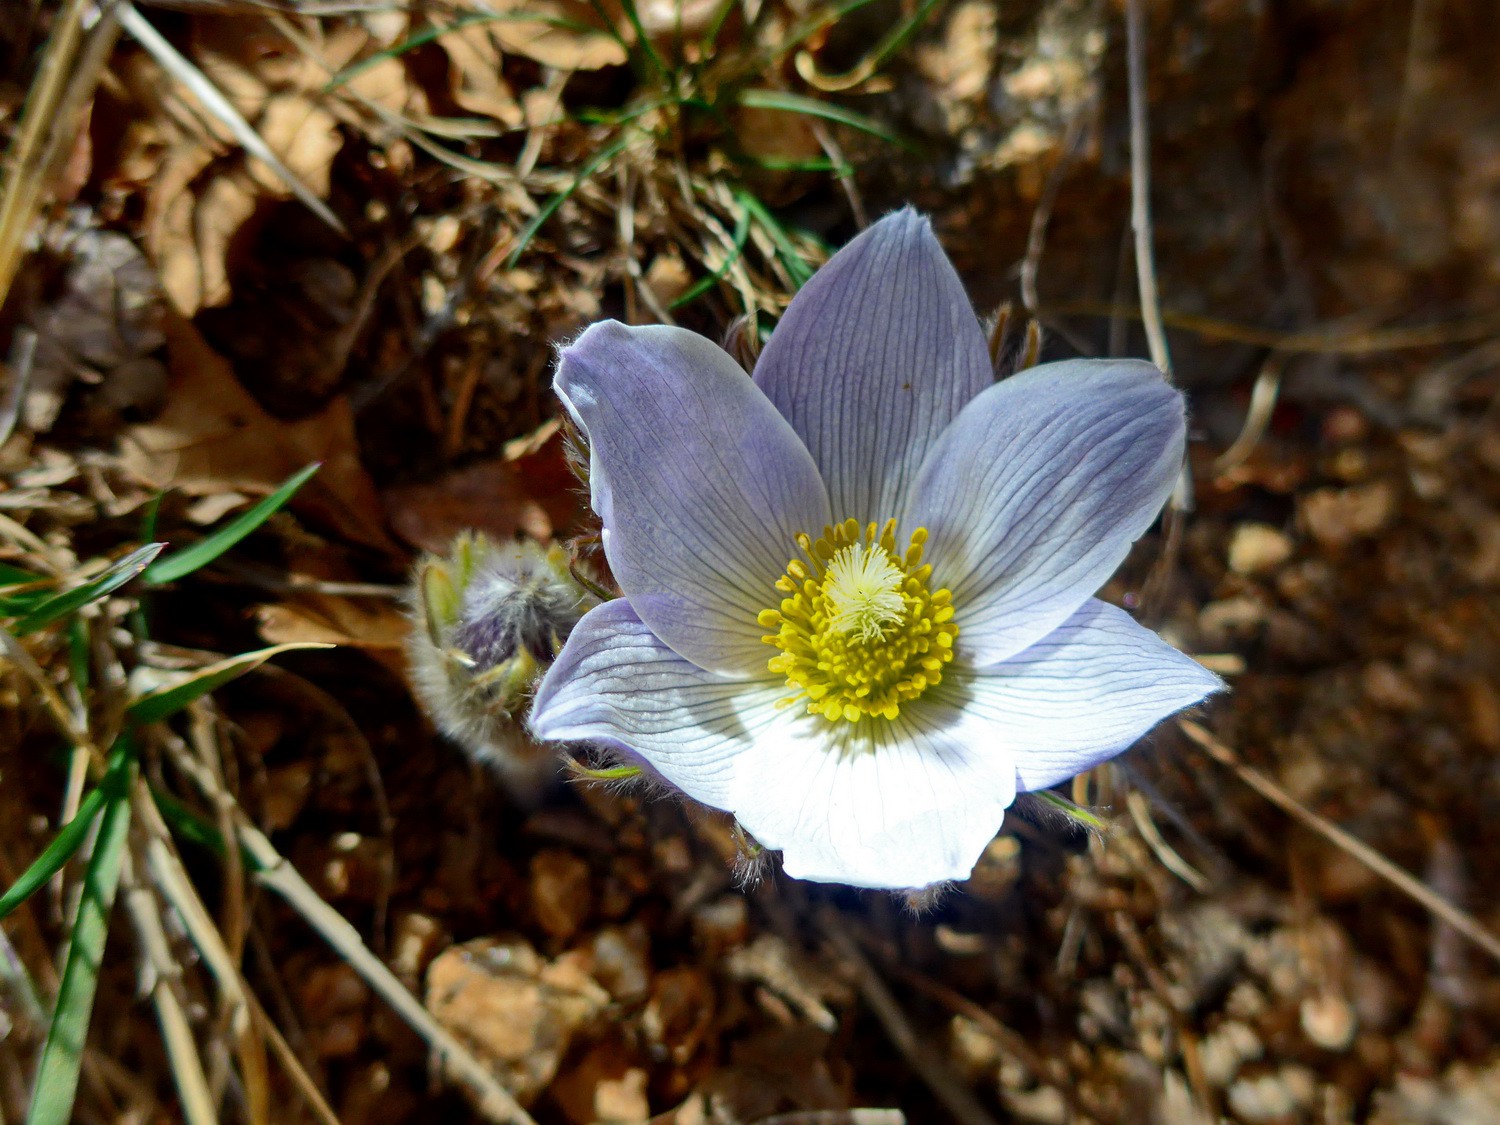 Flower on the Barr Trail (Usual descent of Manitou Incline)